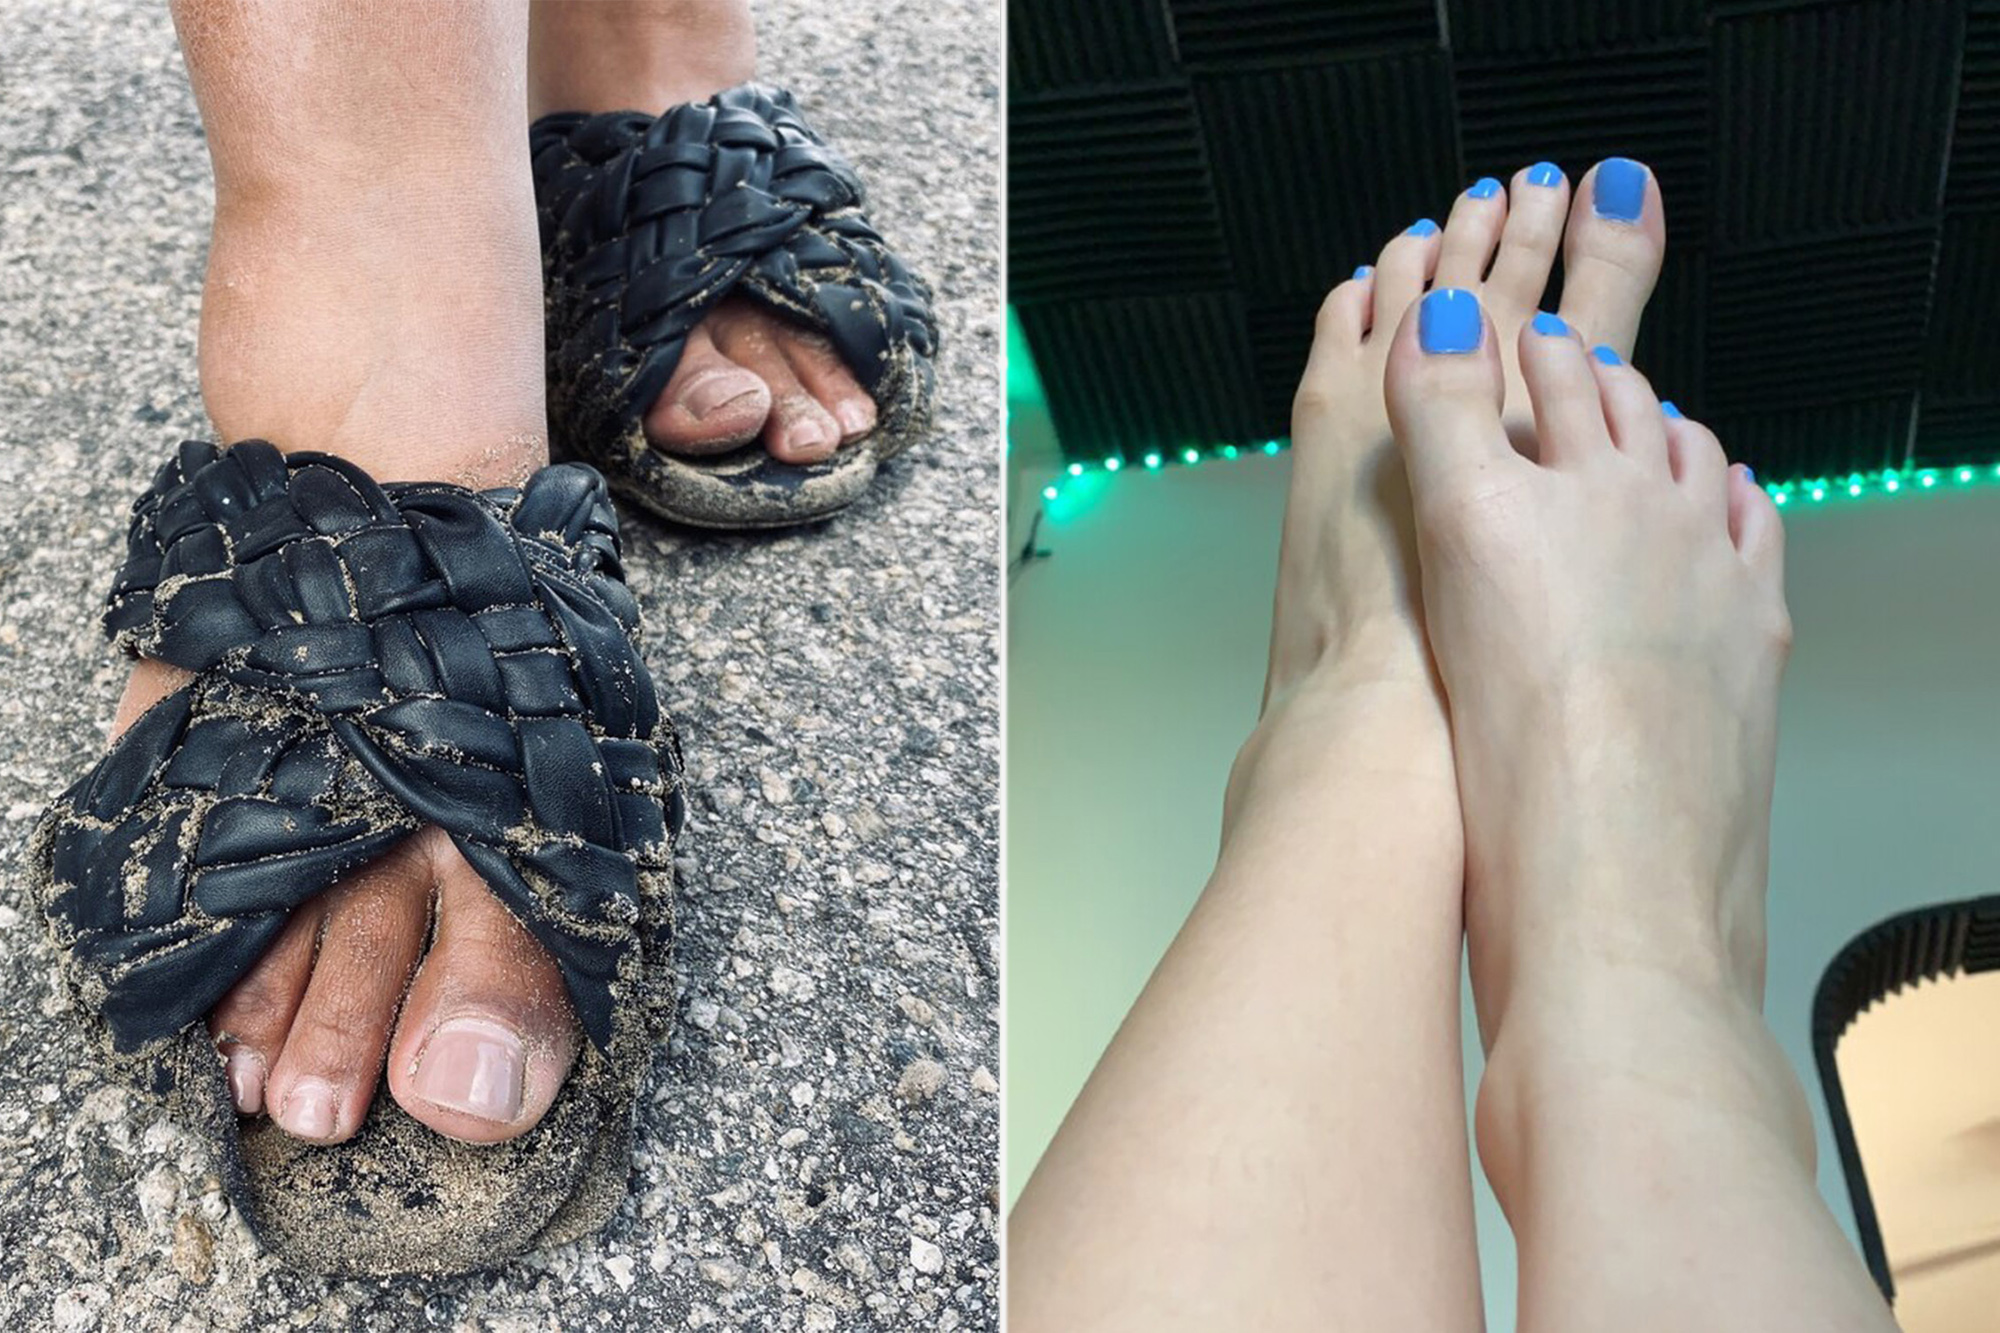 annie terrill recommends friend foot worship pic